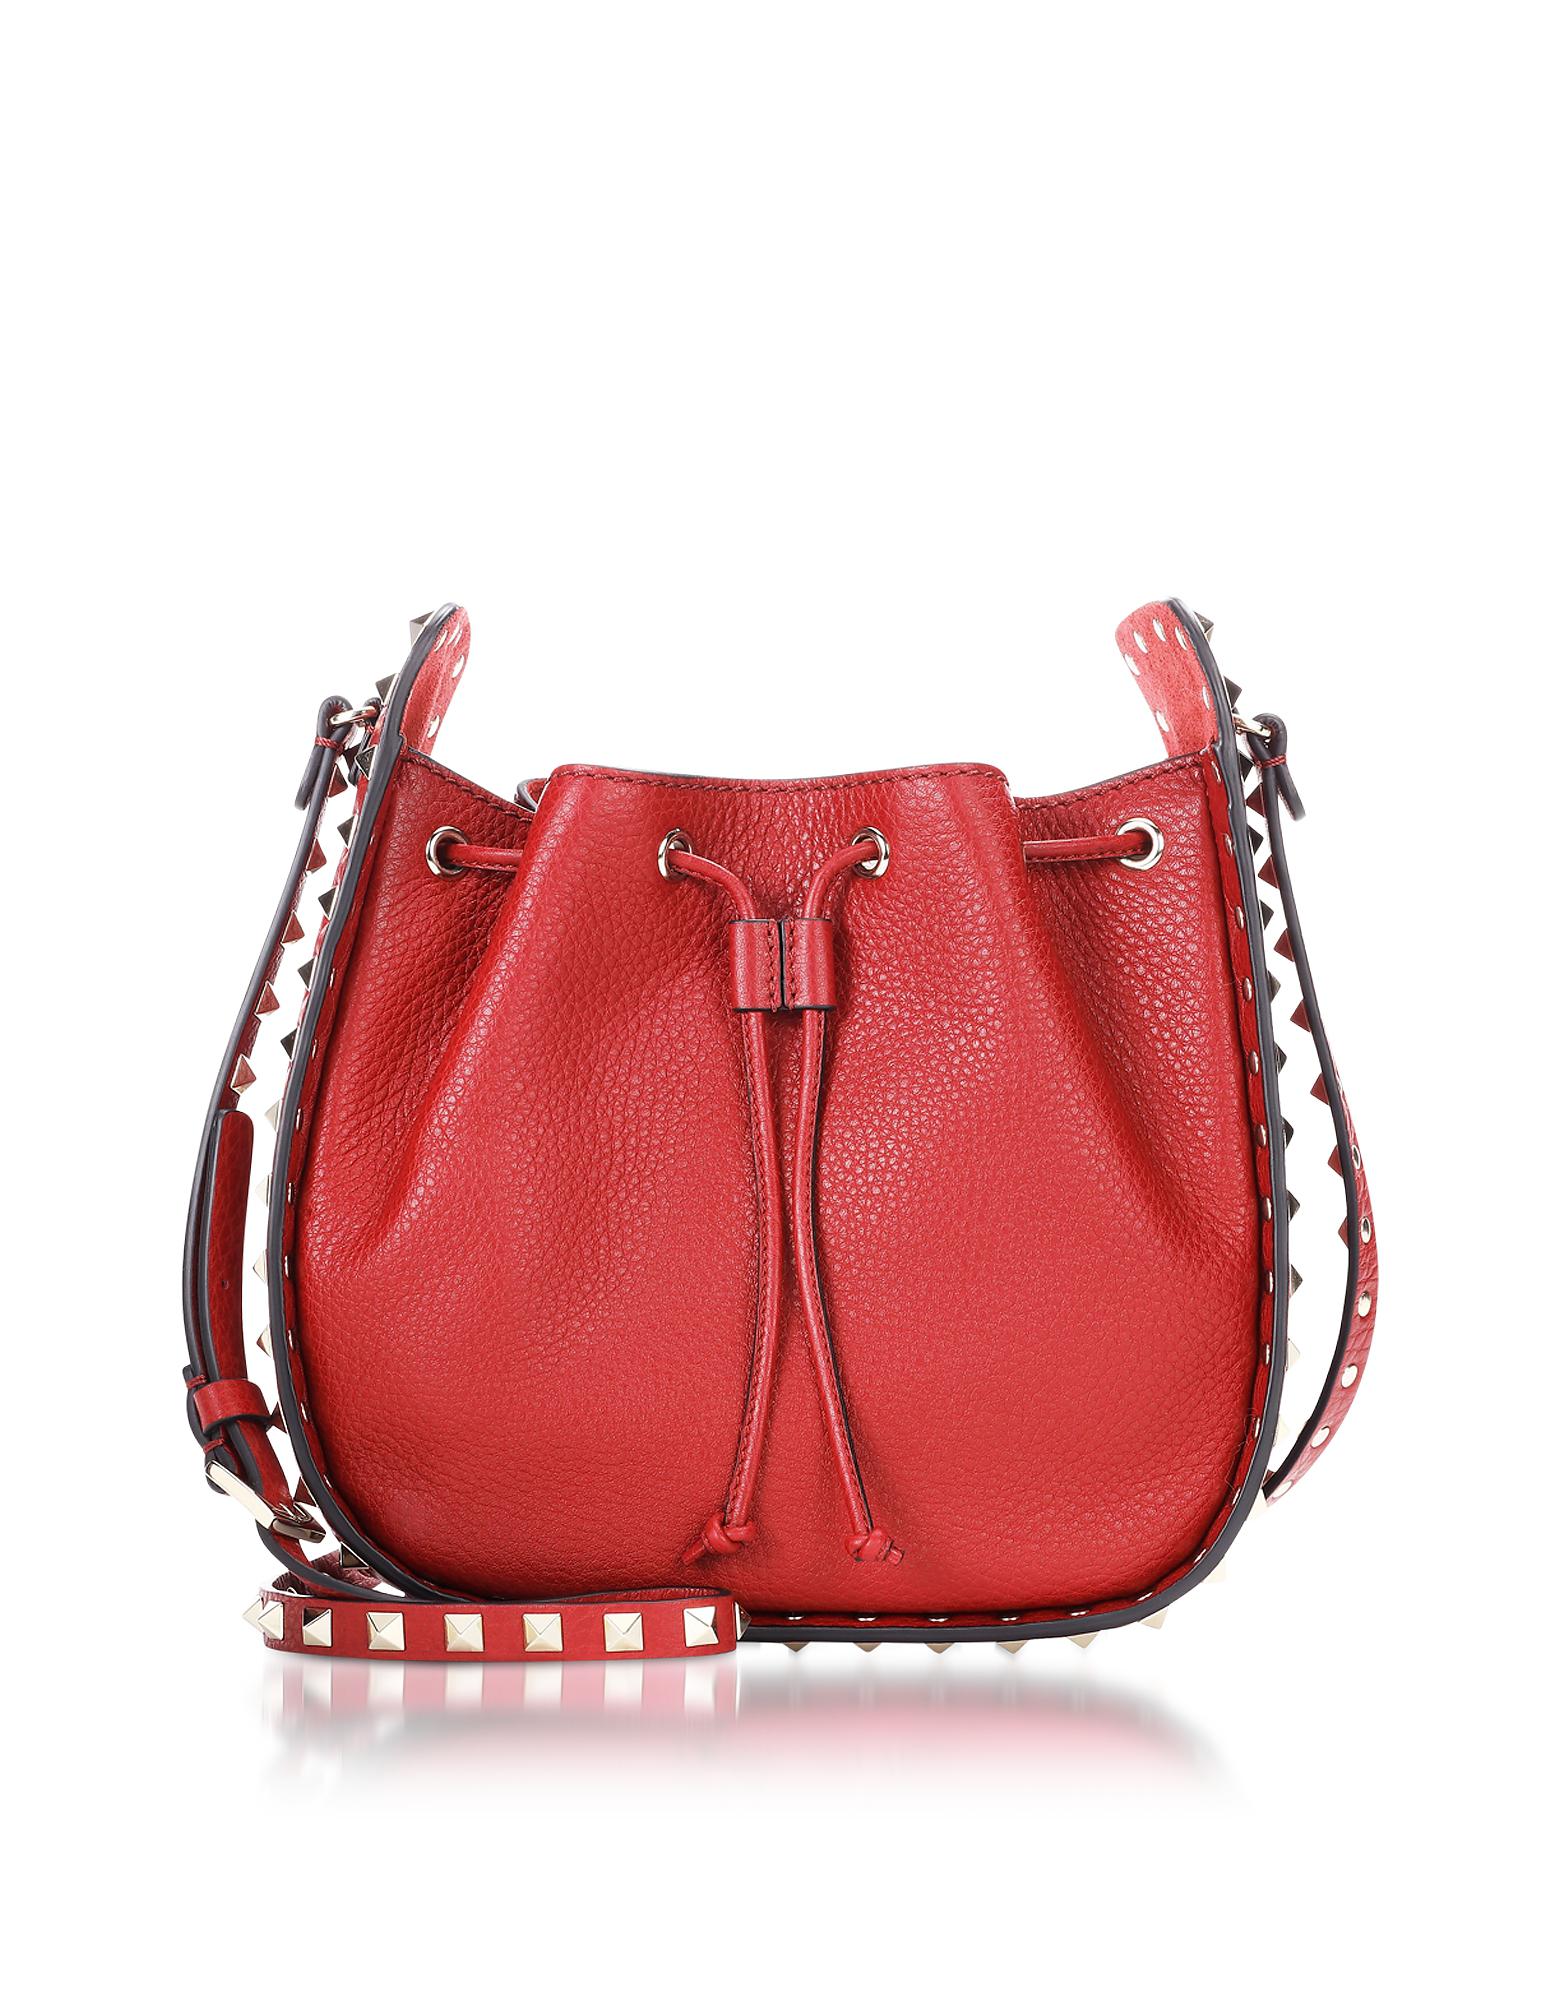 Lyst - Valentino Rubin Leather Rockstud Small Bucket Bag in Red